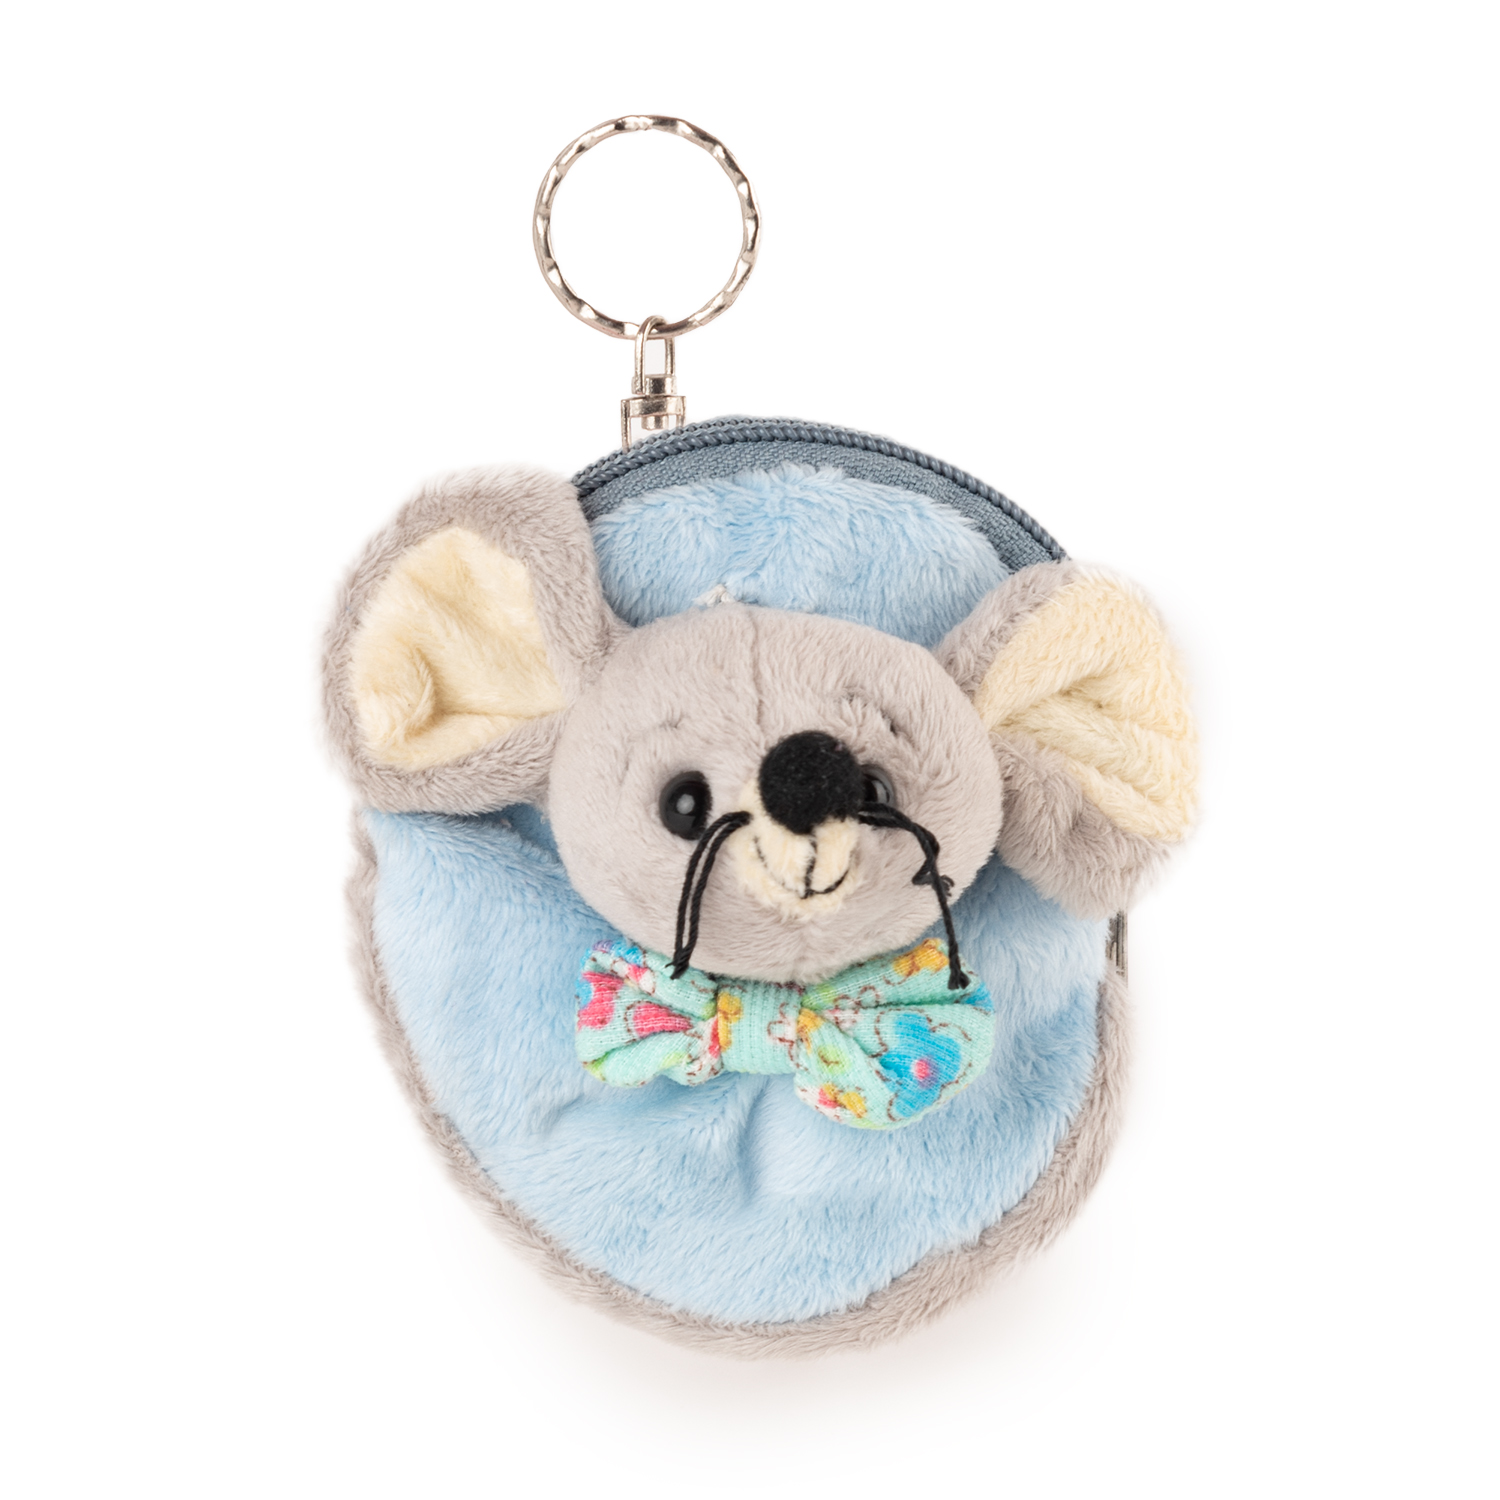 Purse with mouse - Blue